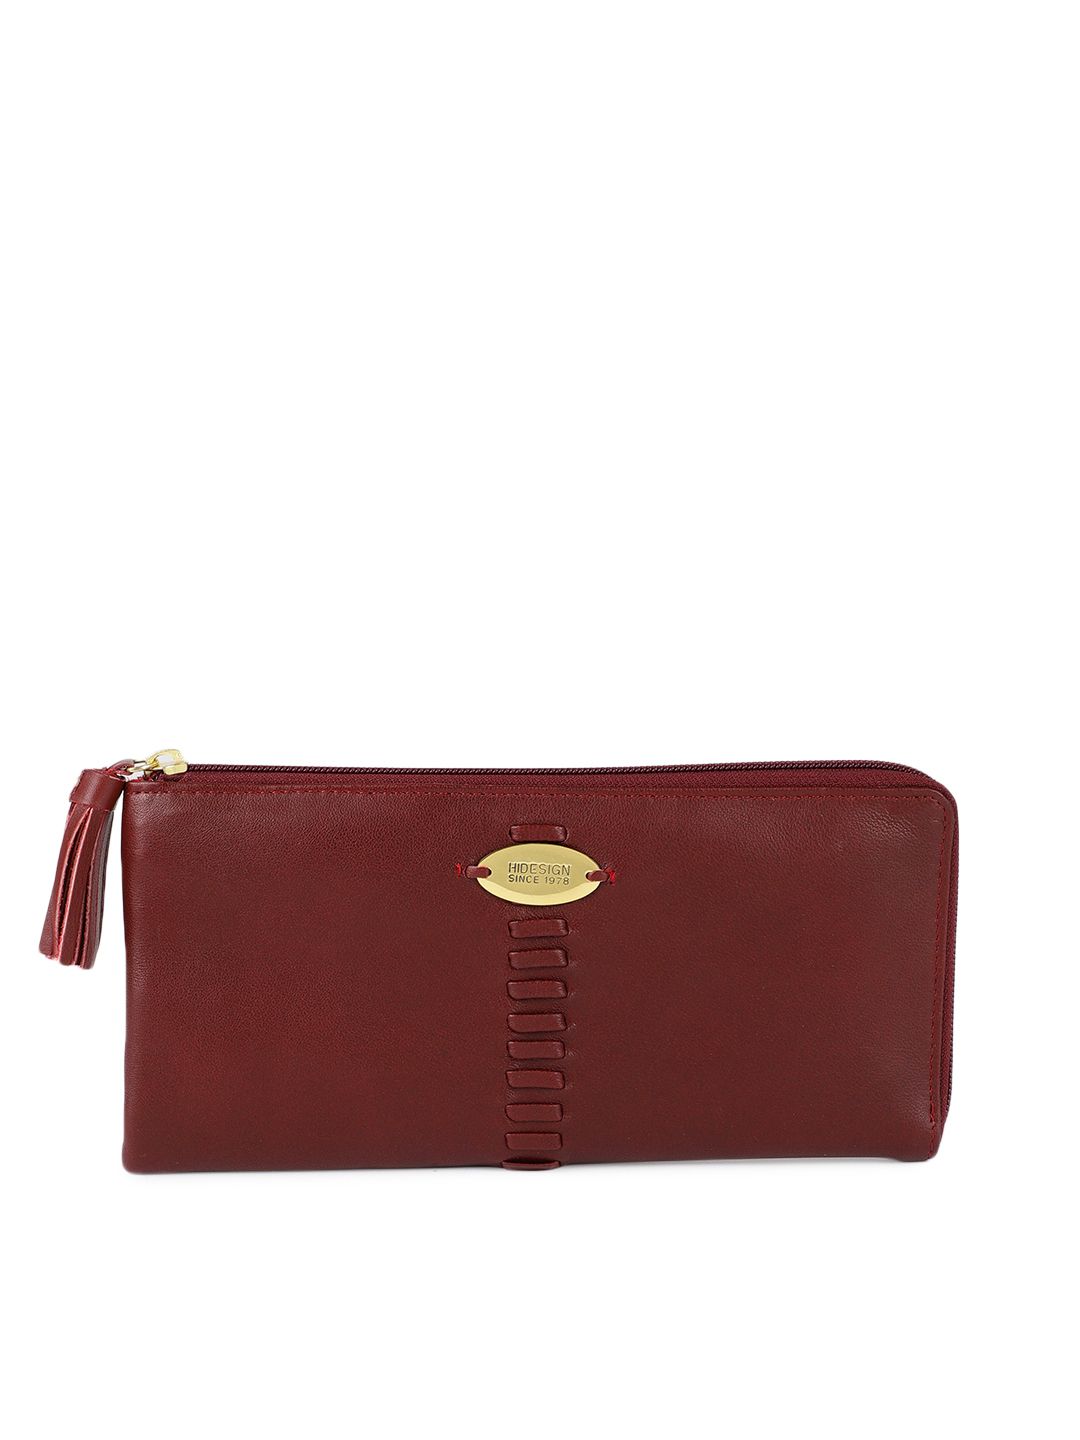 Hidesign Women Leather Red Solid Zip Around Wallet Price in India